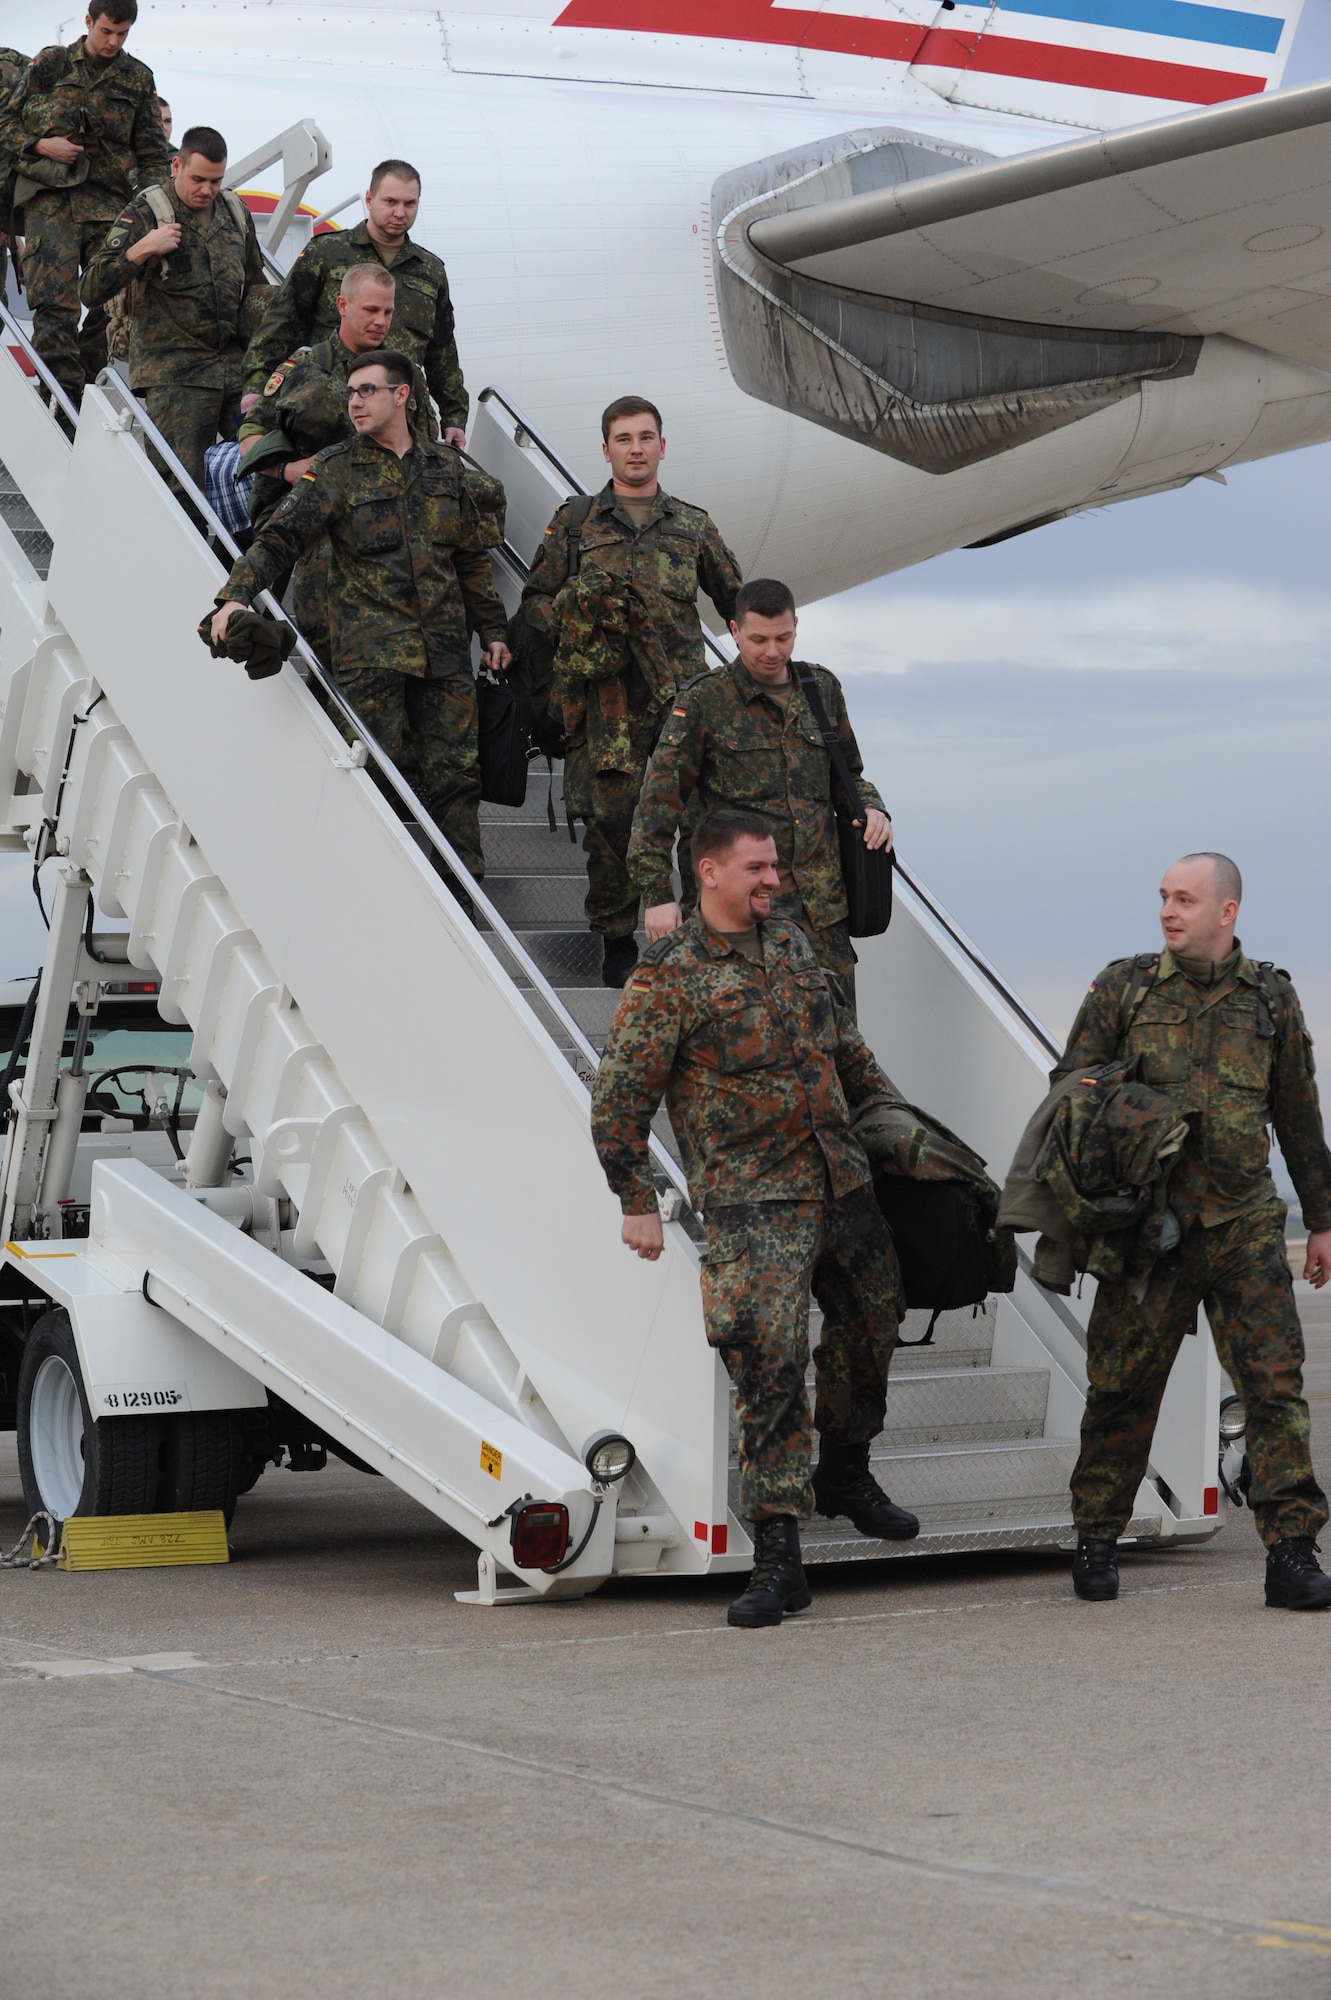 German soldiers disembark from a French air force Airbus A310 that arrived Jan. 9, 2014, at Incirlik Air Base, Turkey. The German government recently approved a year-long extension for German support of the ongoing NATO mission to increase Turkey’s air defense capabilities against Syrian ballistic missile threats. The arriving personnel will relieve deployed soldiers currently manning two Patriot missile batteries in Kahramanmaras, Turkey. (U.S. Air Force photo by 1st Lt. David Liapis/Released)